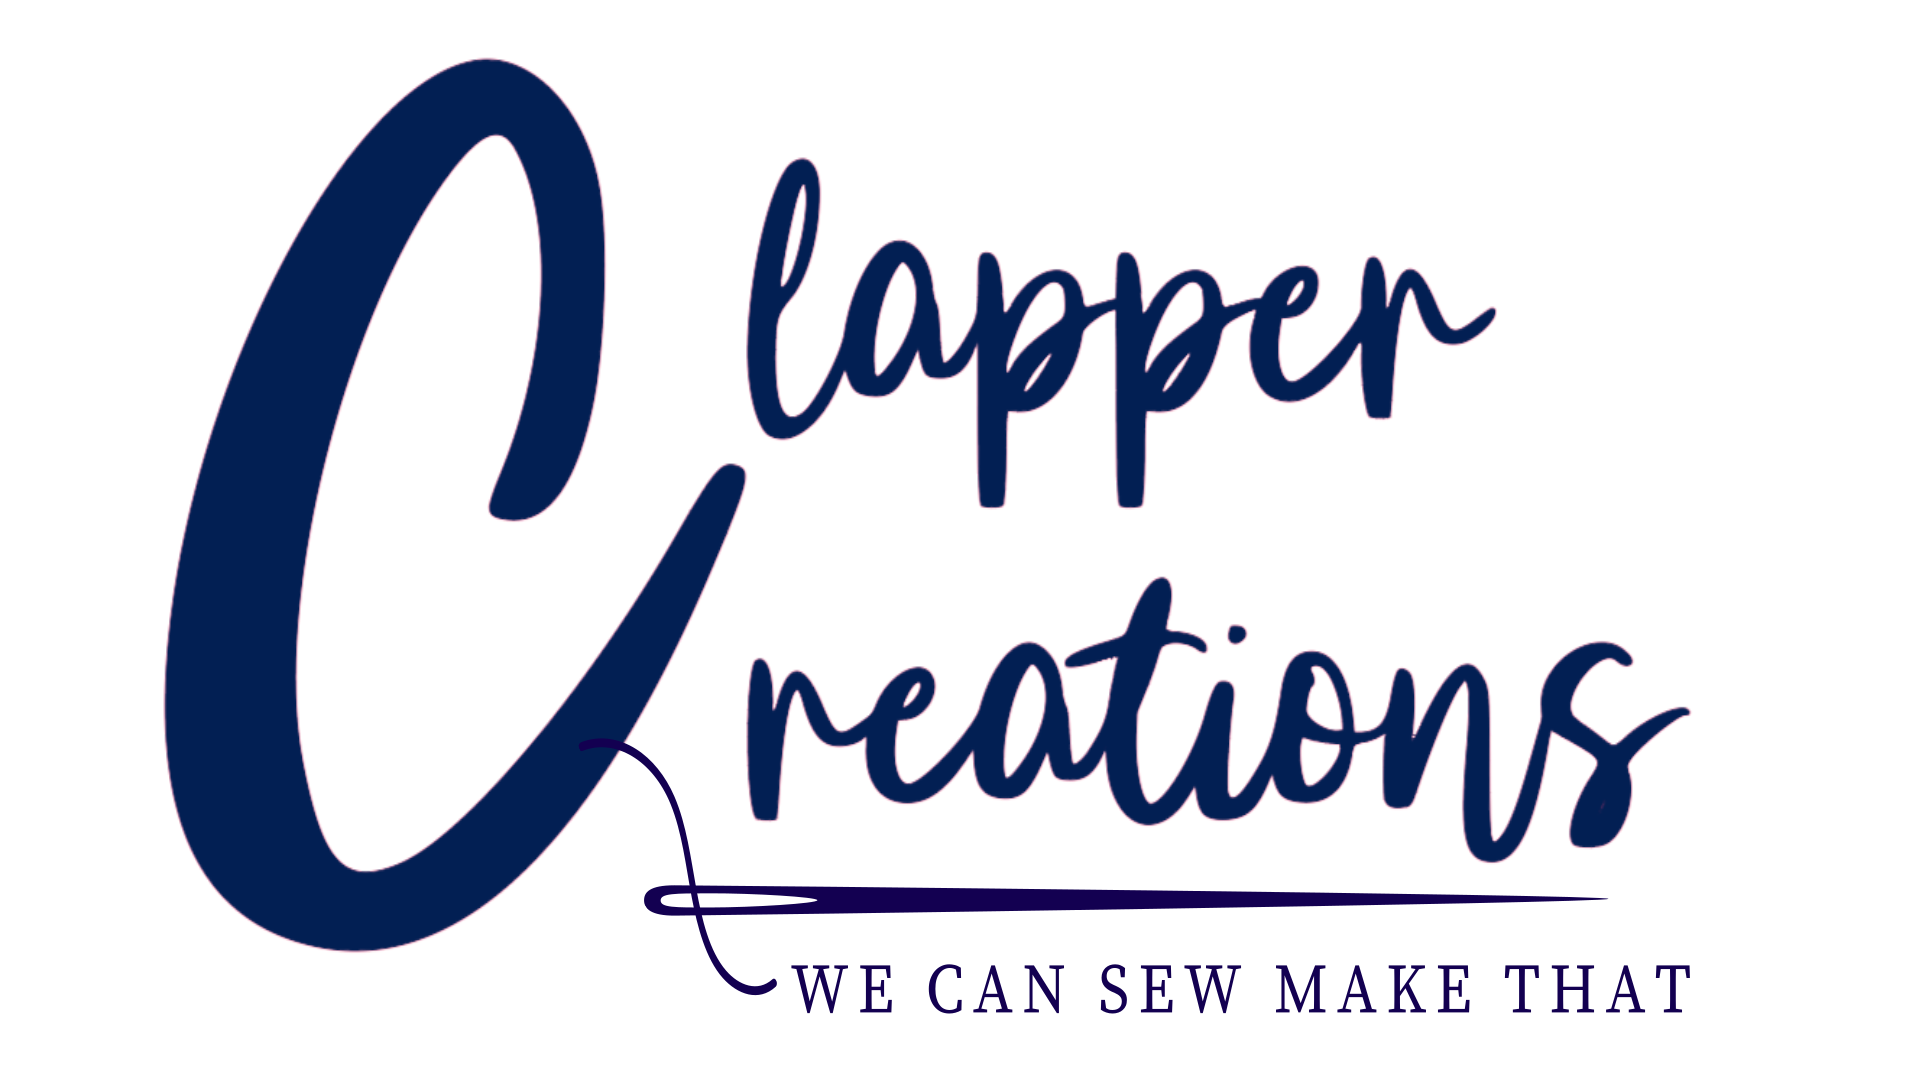 ClapperCreations